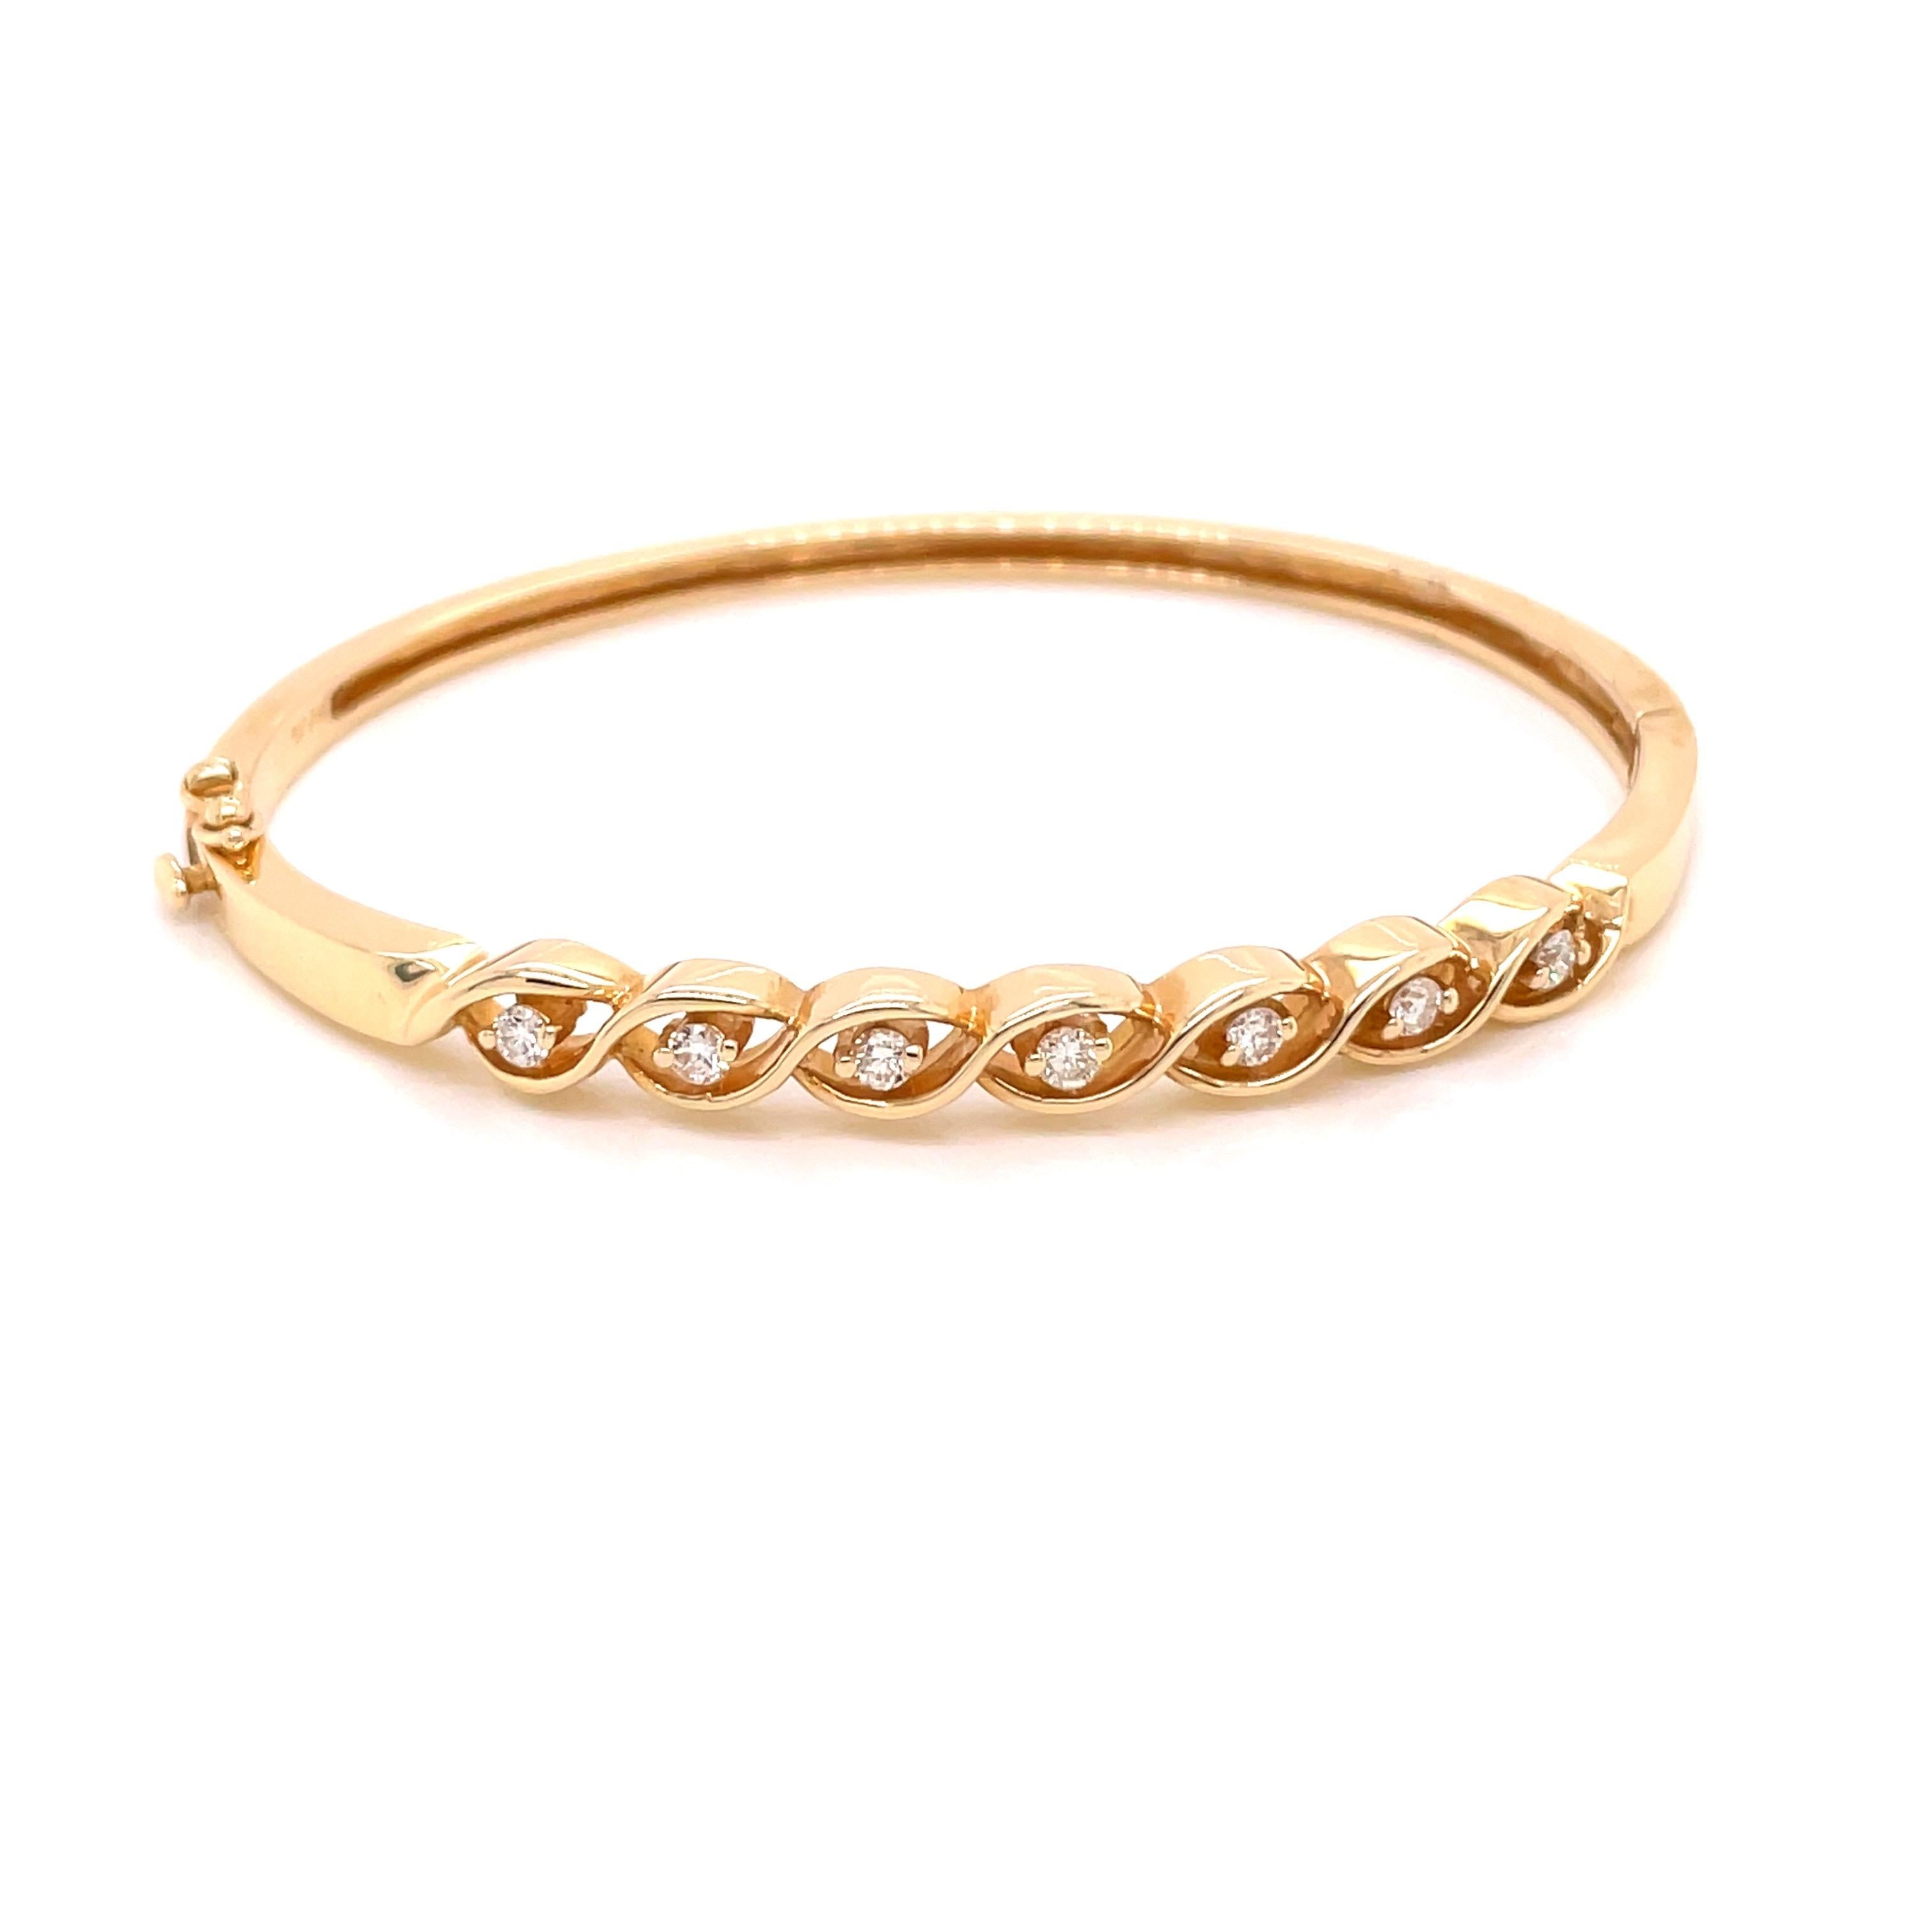 14K Yellow Gold Diamond Bangle Bracelet .25ct - The bangle is set with 7 round brilliant diamonds weighing .25ct with G - H color and SI clarity. The width of the bangle on top is 4.9mm and tapers to 2.7mm on the bottom. The inside diameter is 1.9